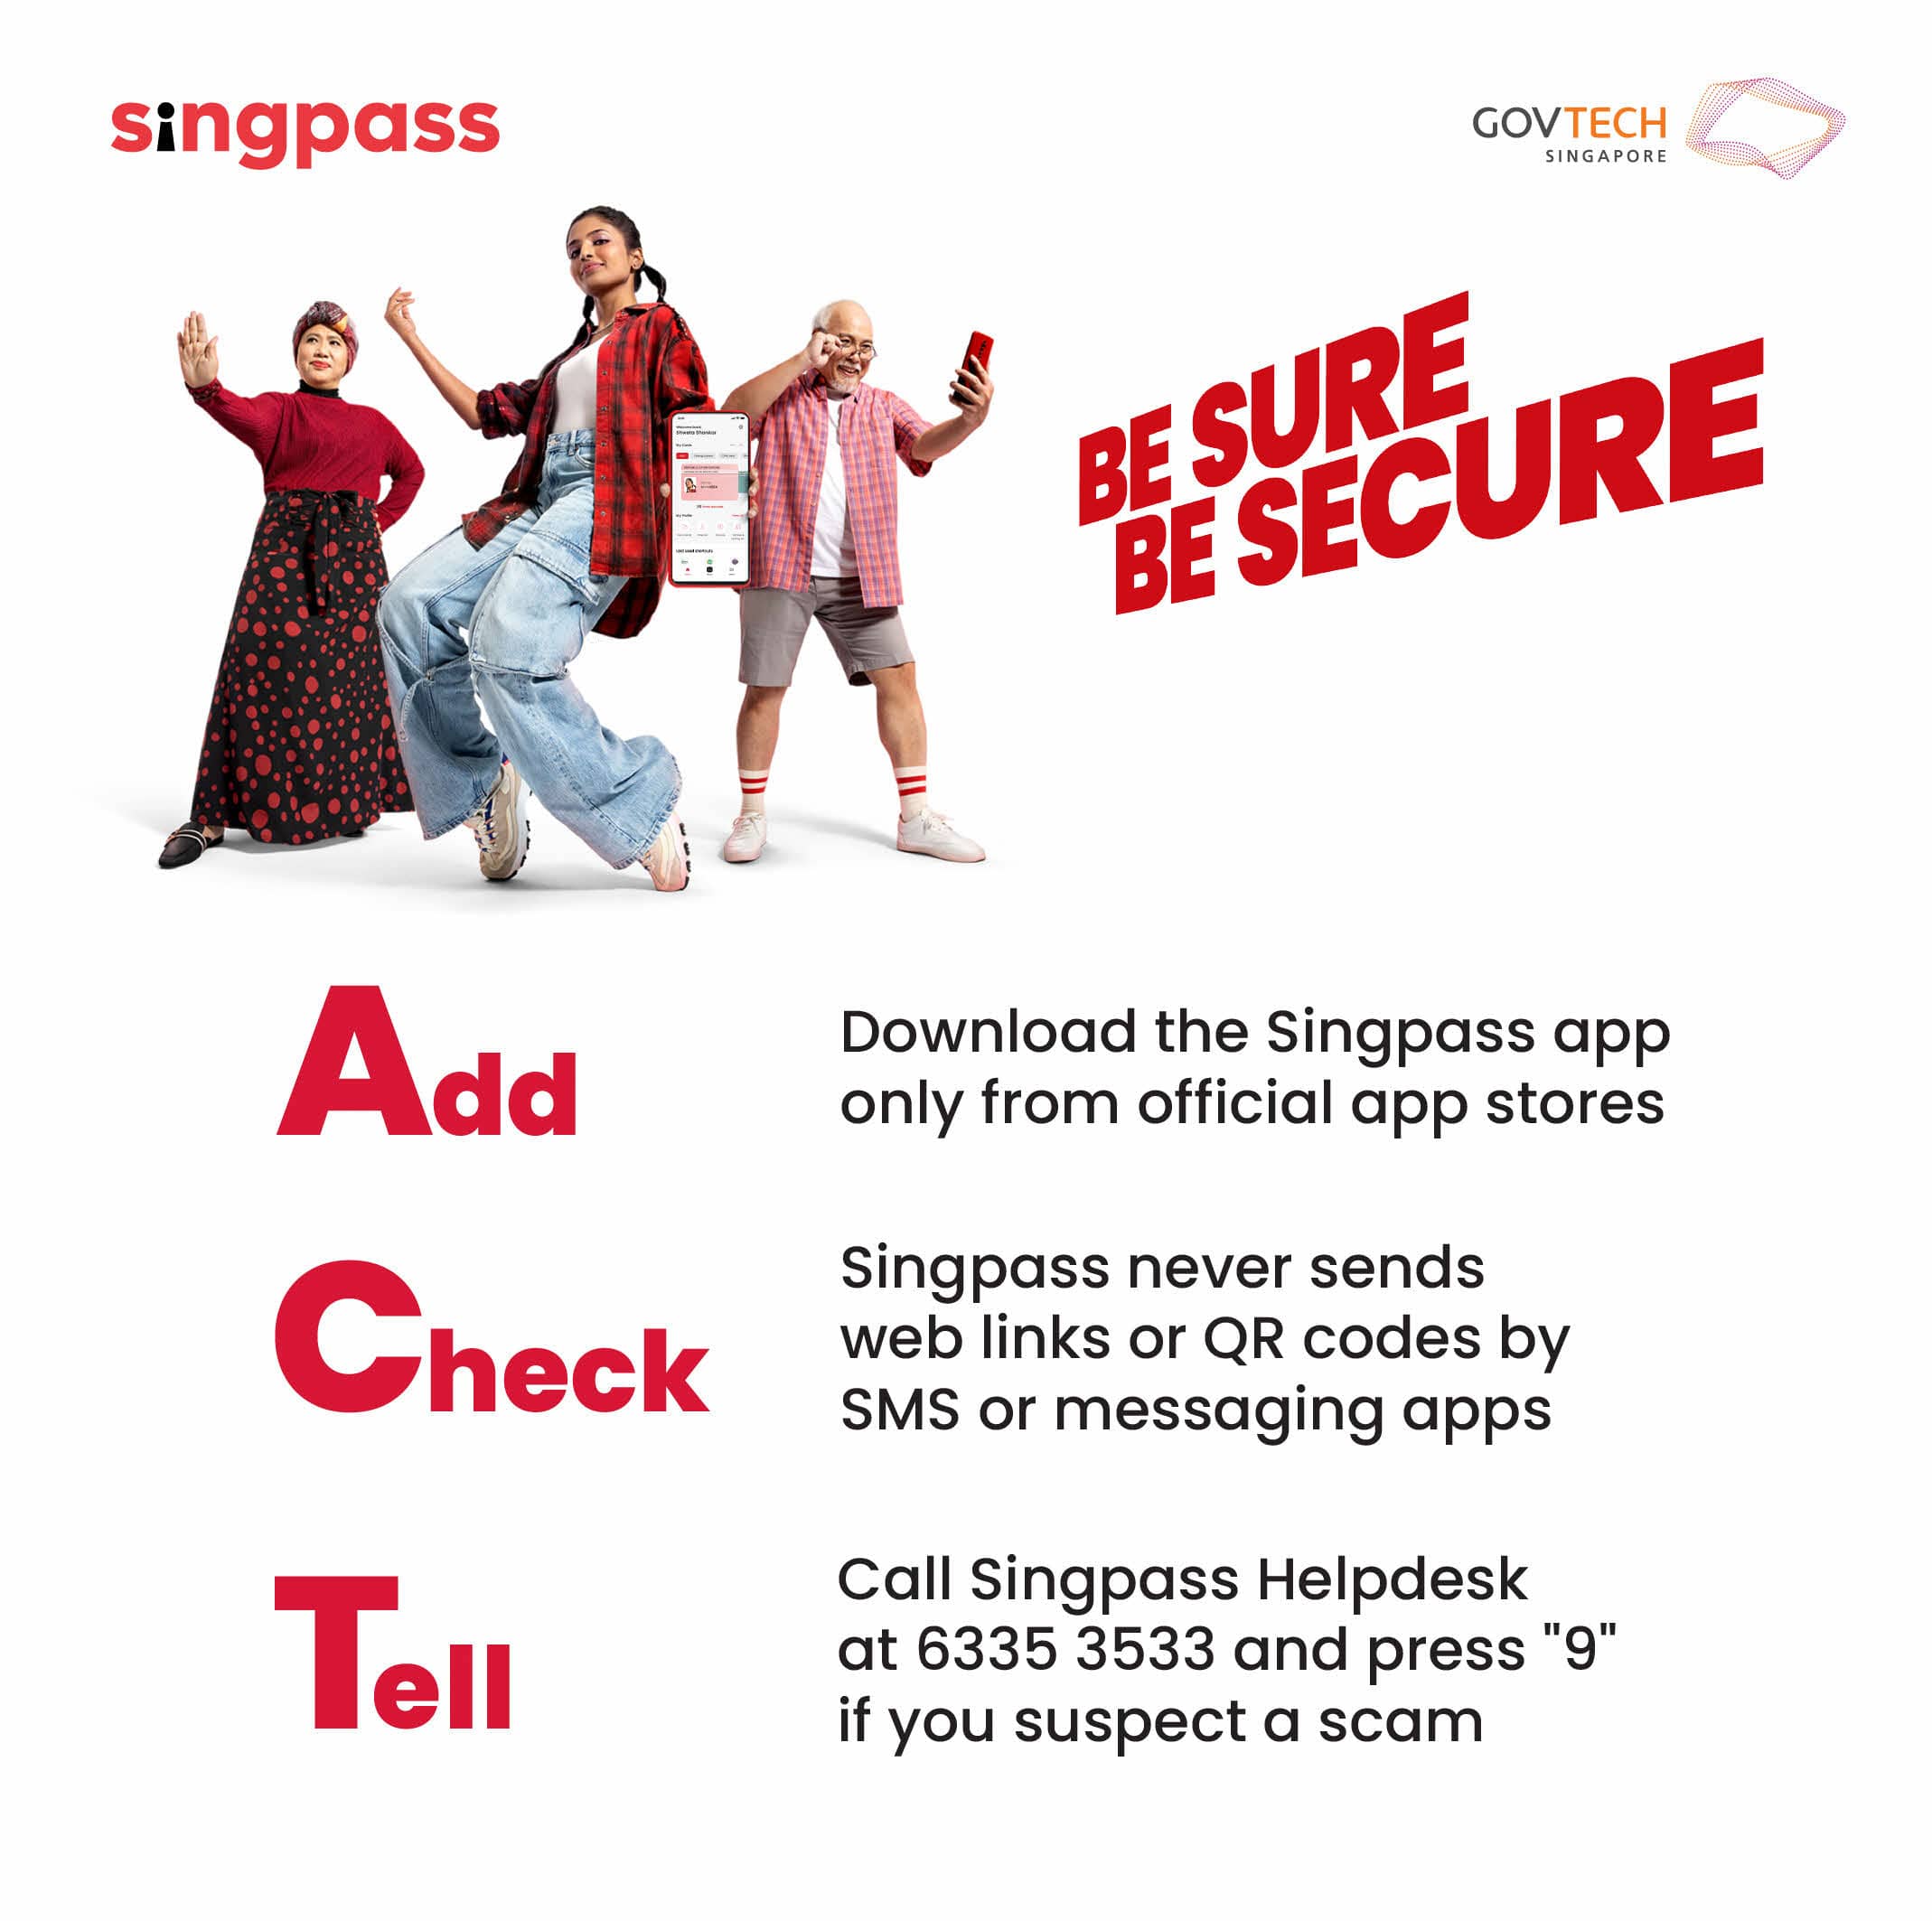 The ACT security tips to protect your Singpass account from scams.